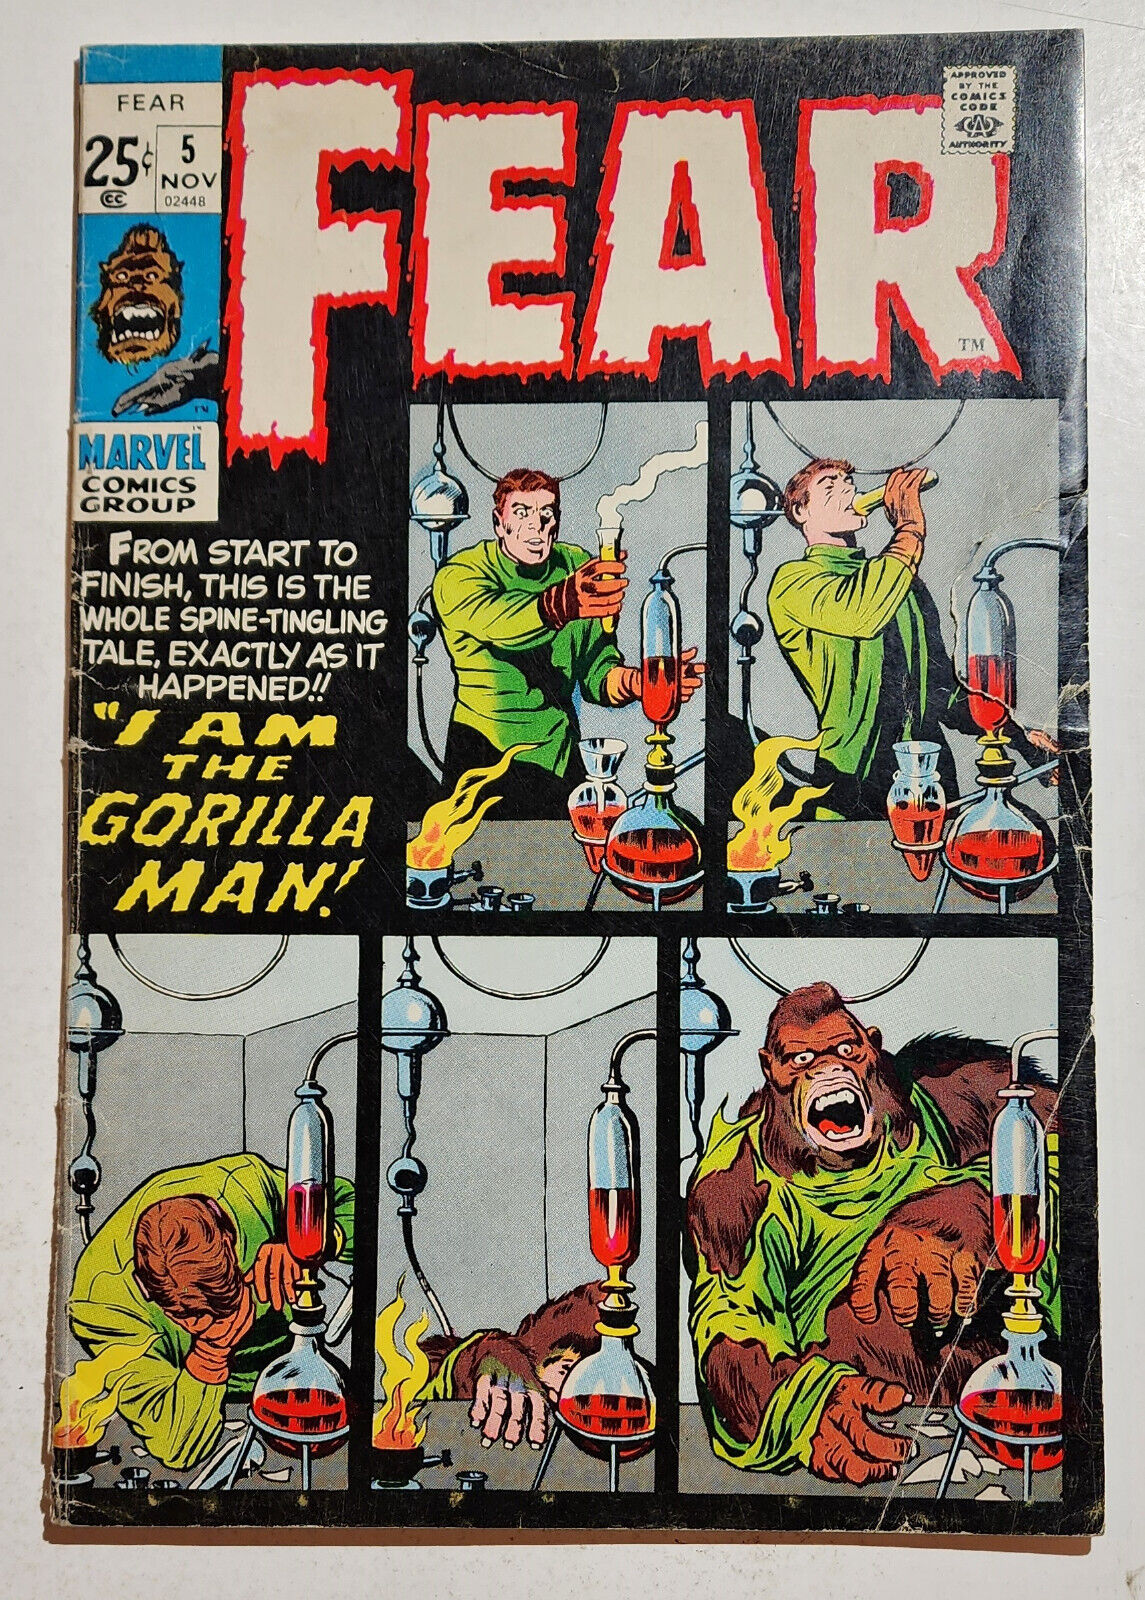 FEAR #5 KIRBY and DITKO  1971 - I Combine shipping